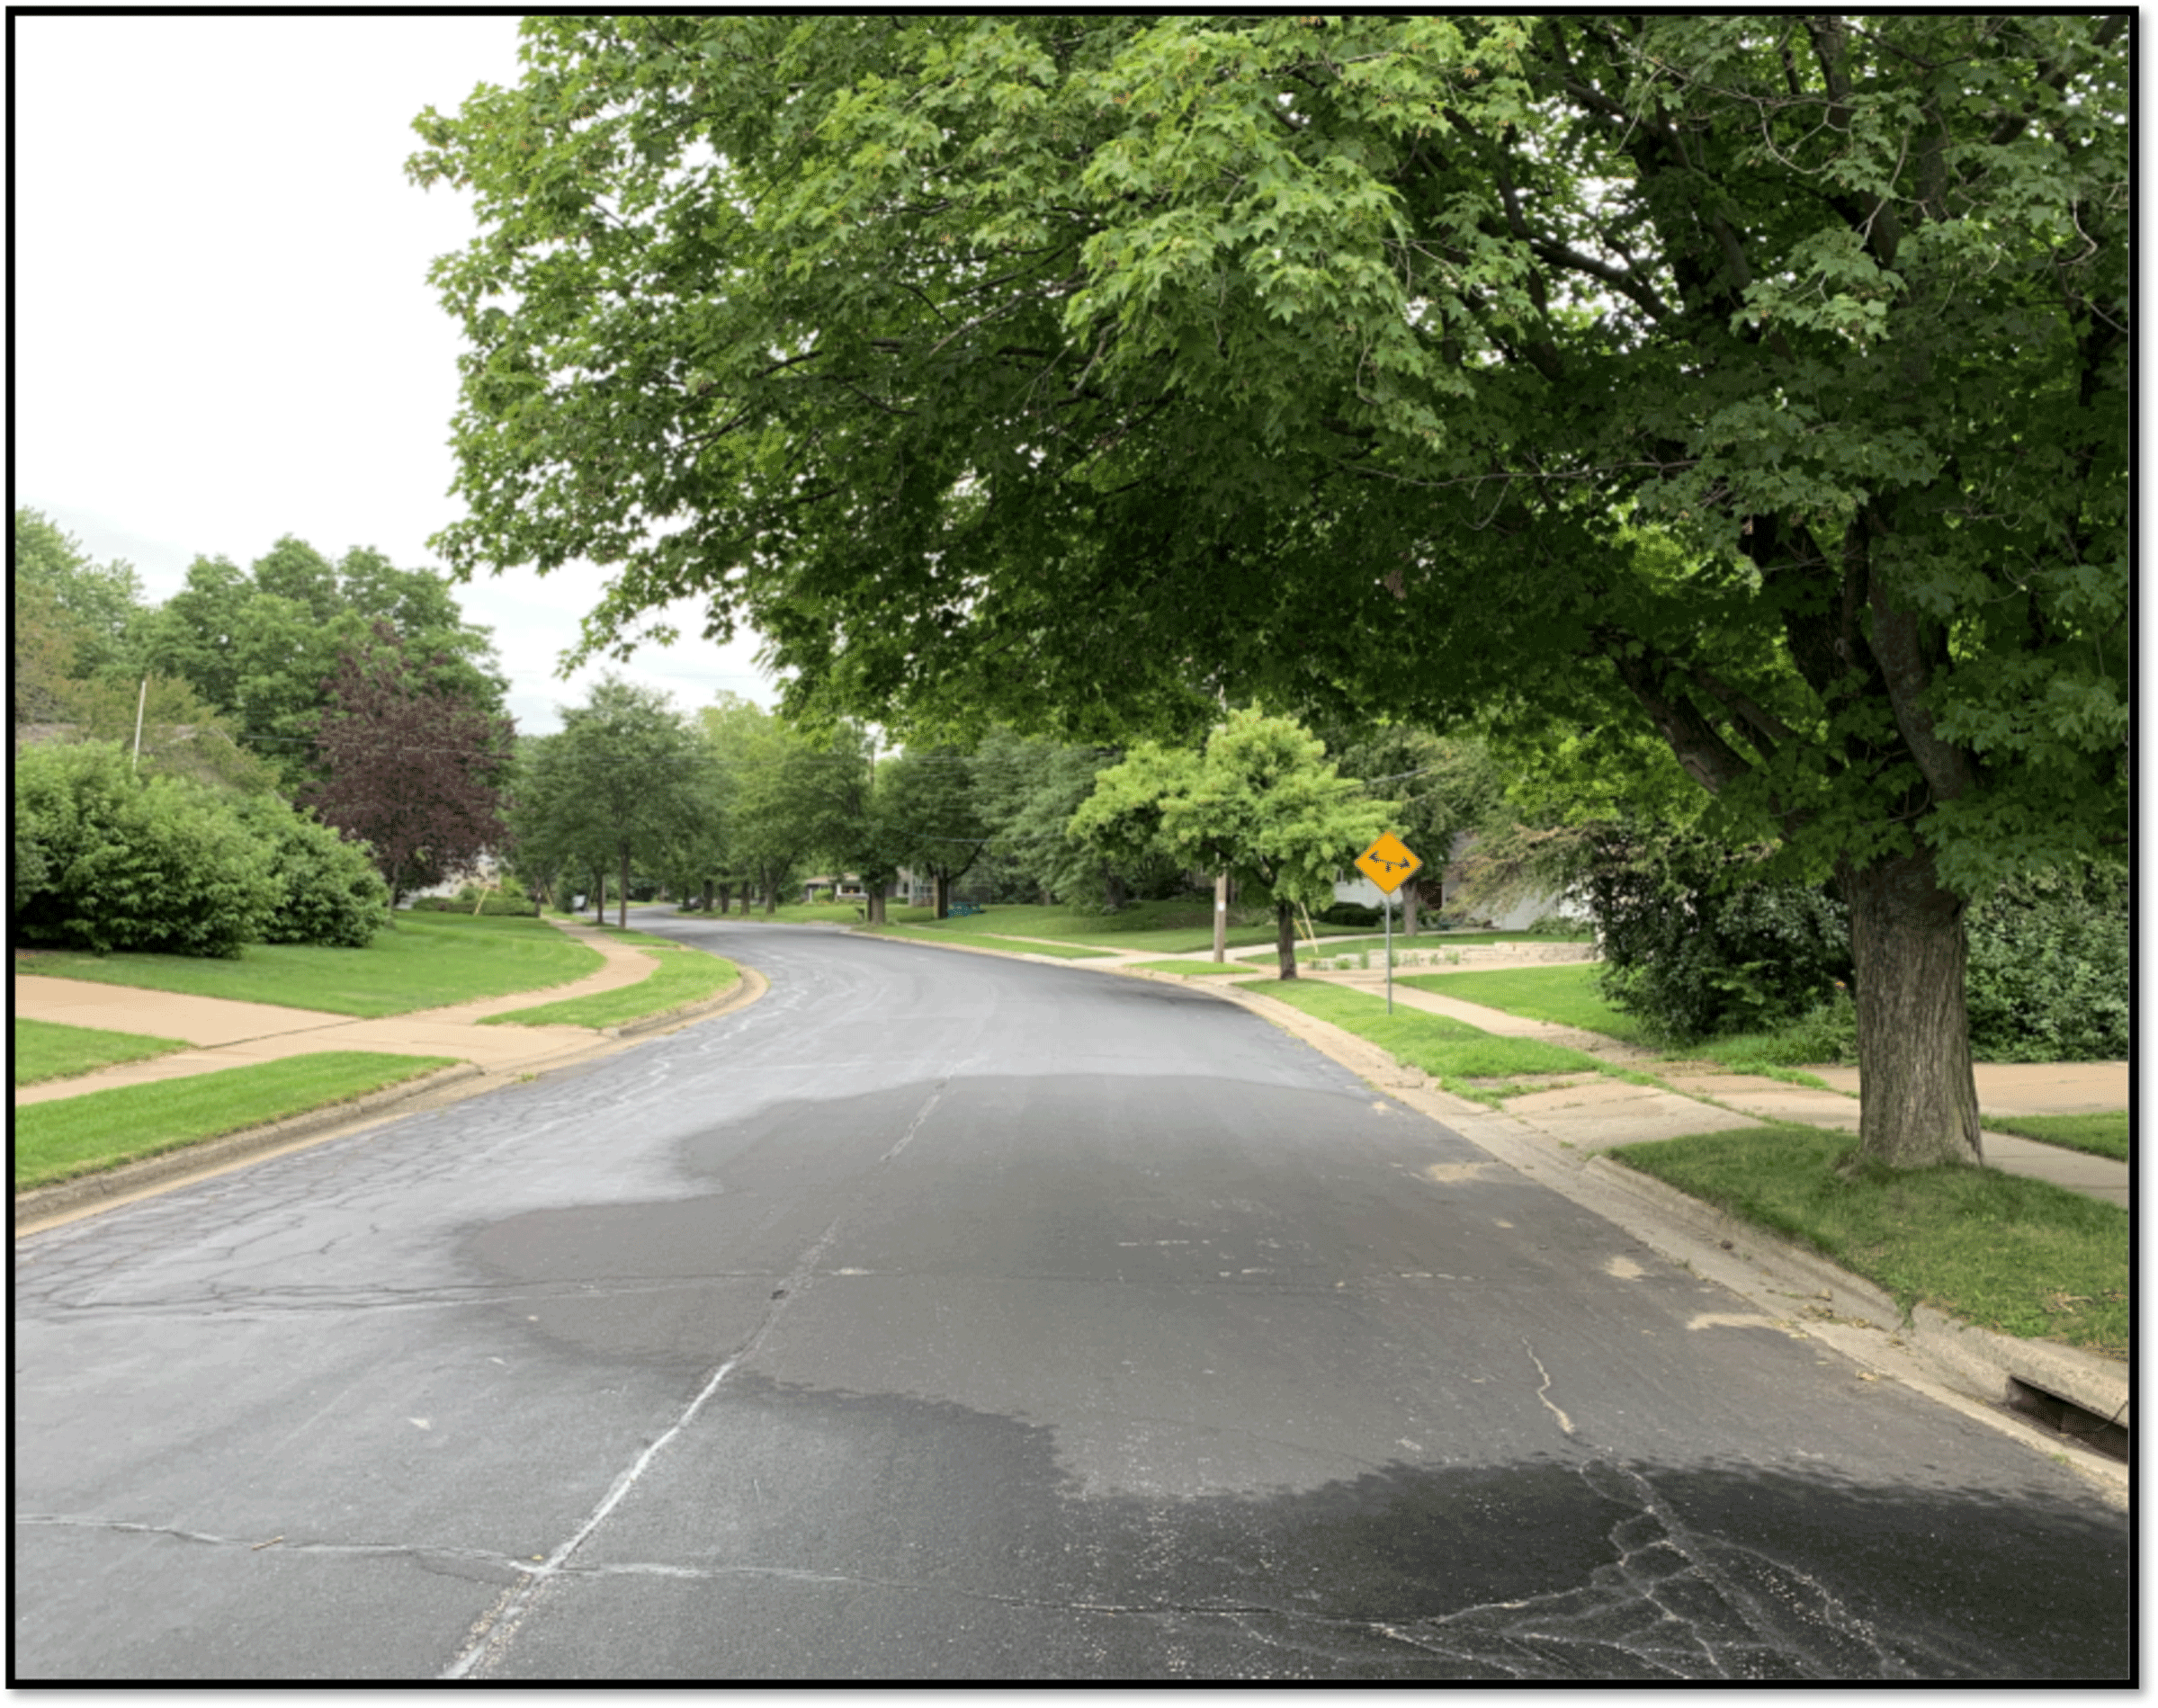 Street surrounded by green vegetation after rainfall.